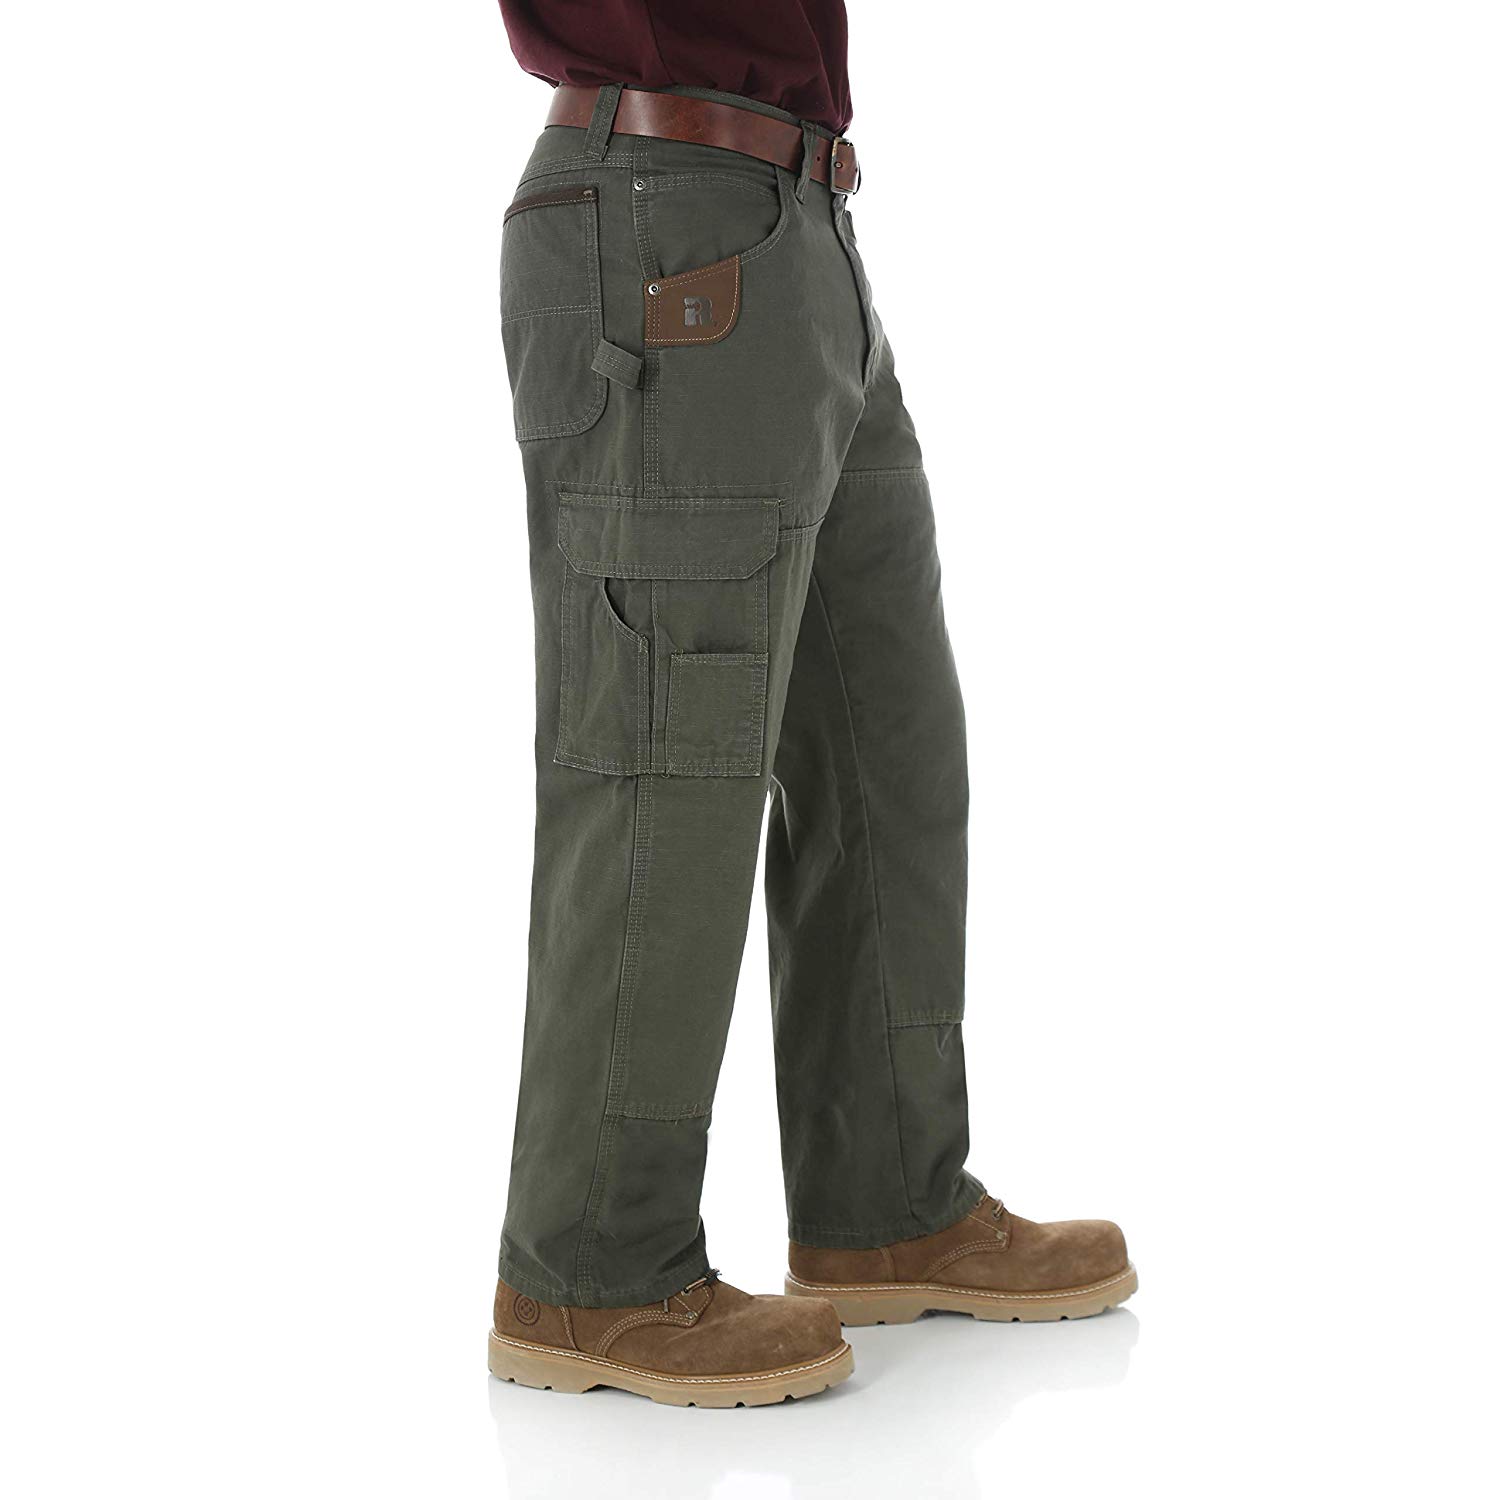 RIGGS WORKWEAR by Wrangler Men's Ranger Pant, Loden,36 x, Loden, Size ...